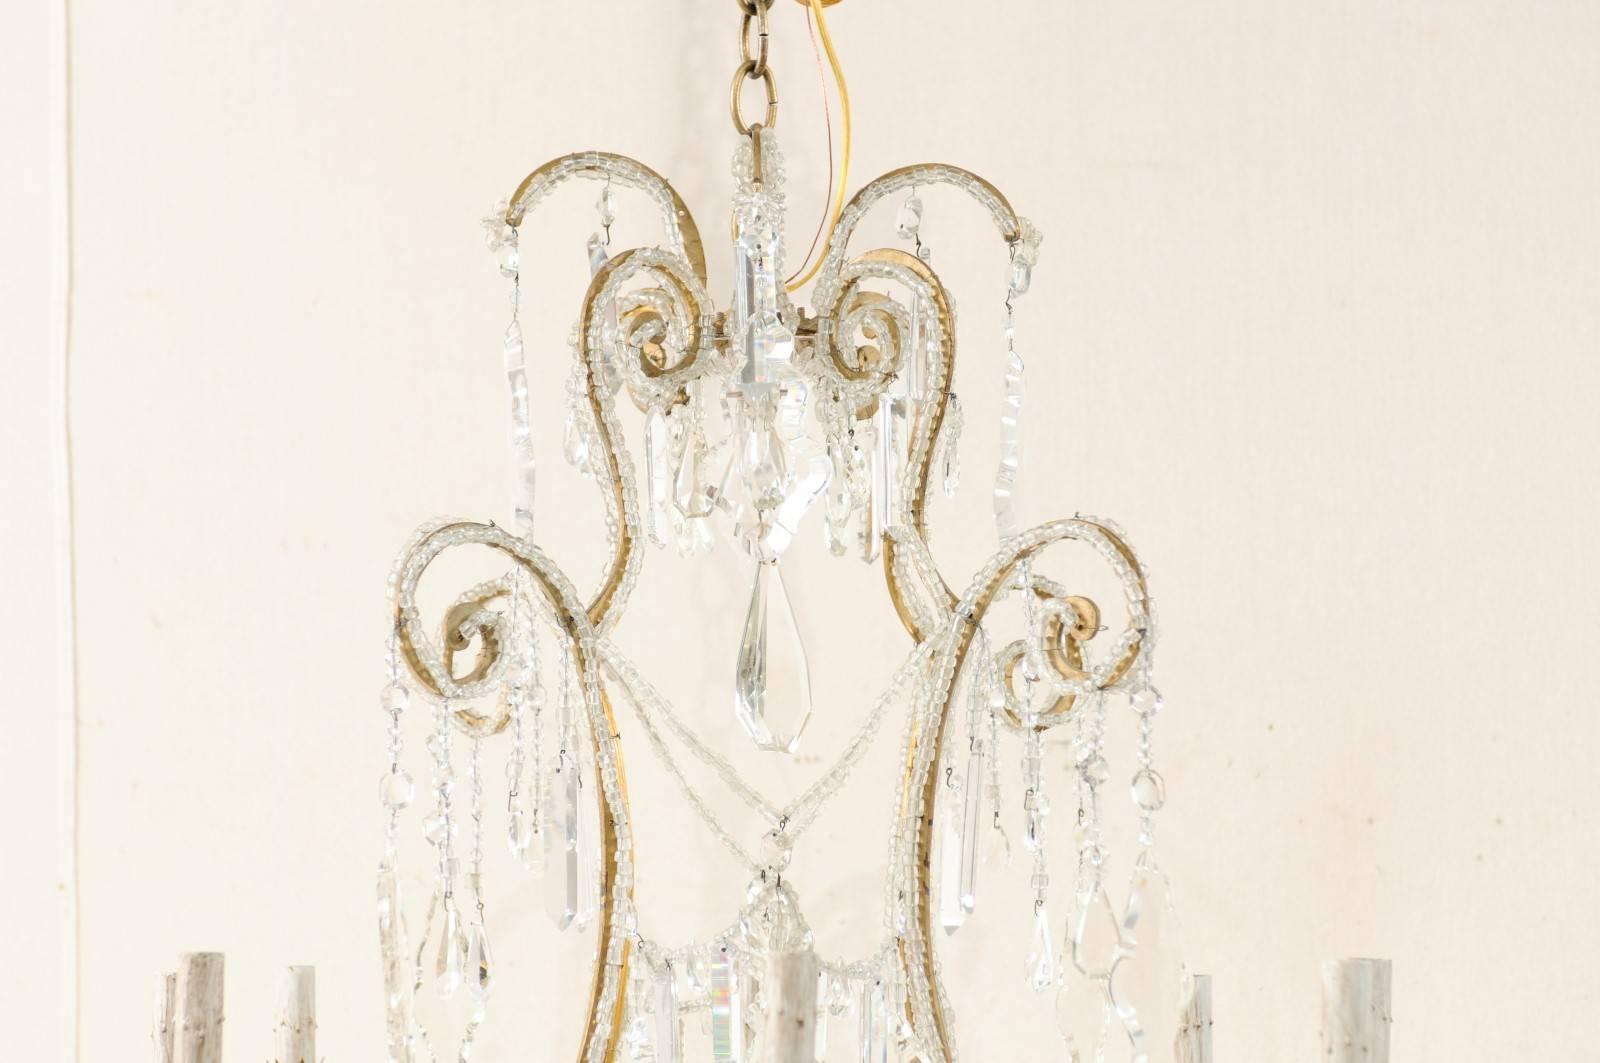 Beaded Italian Eight-Light Crystal and Gilded Iron Chandelier with Ornate Scroll Design